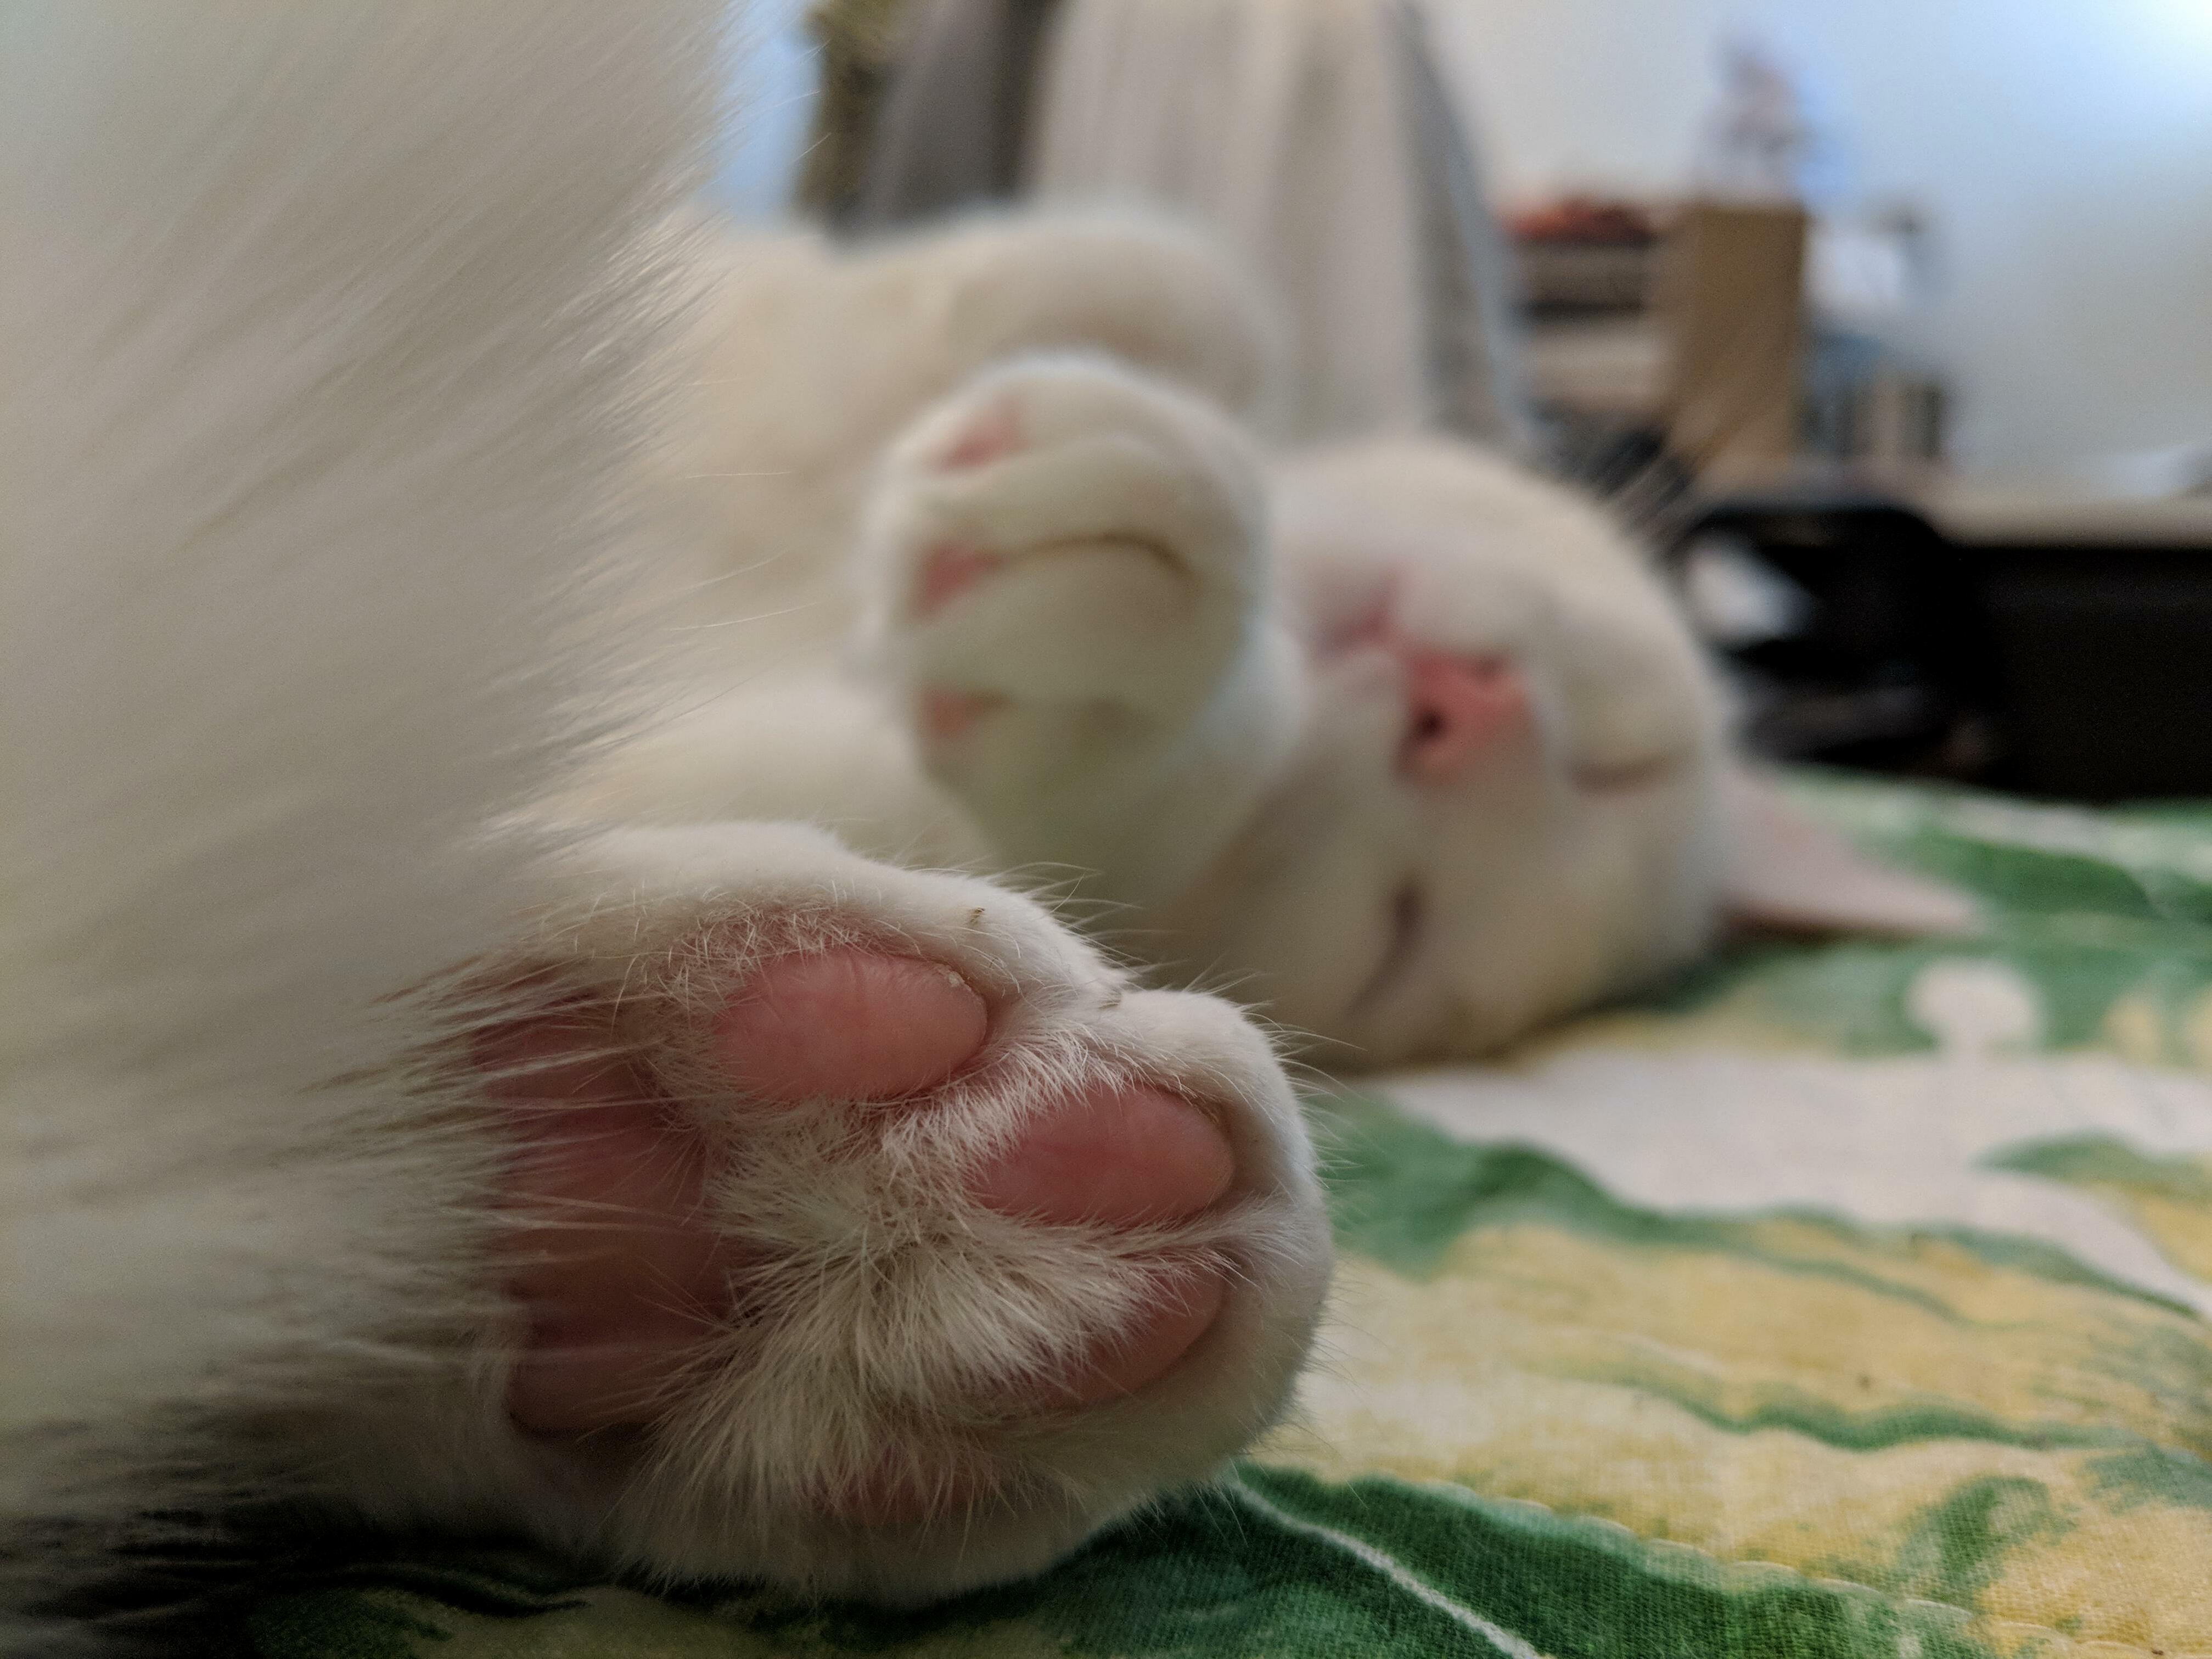 Capturing toe beans are more elusive than one may think